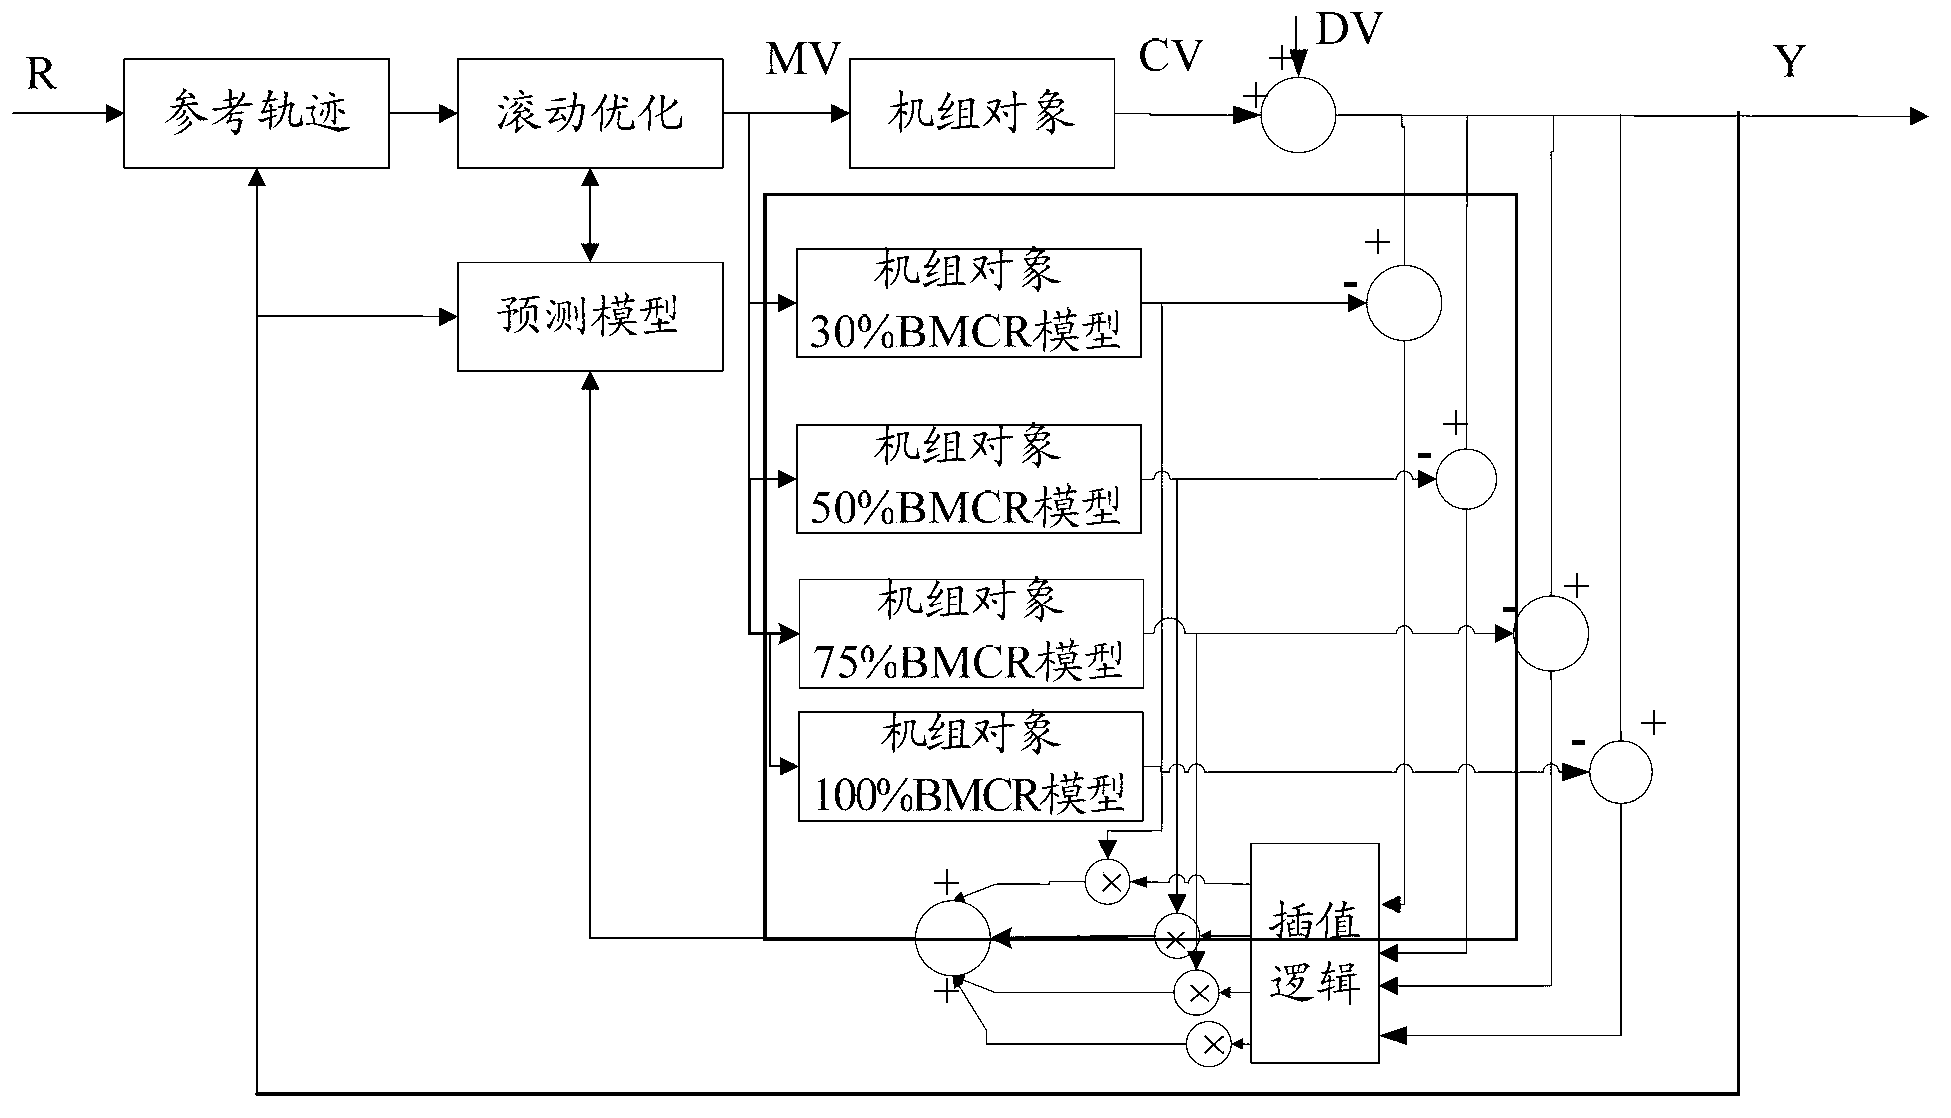 MMPC-based supercritical unit coordination and control method